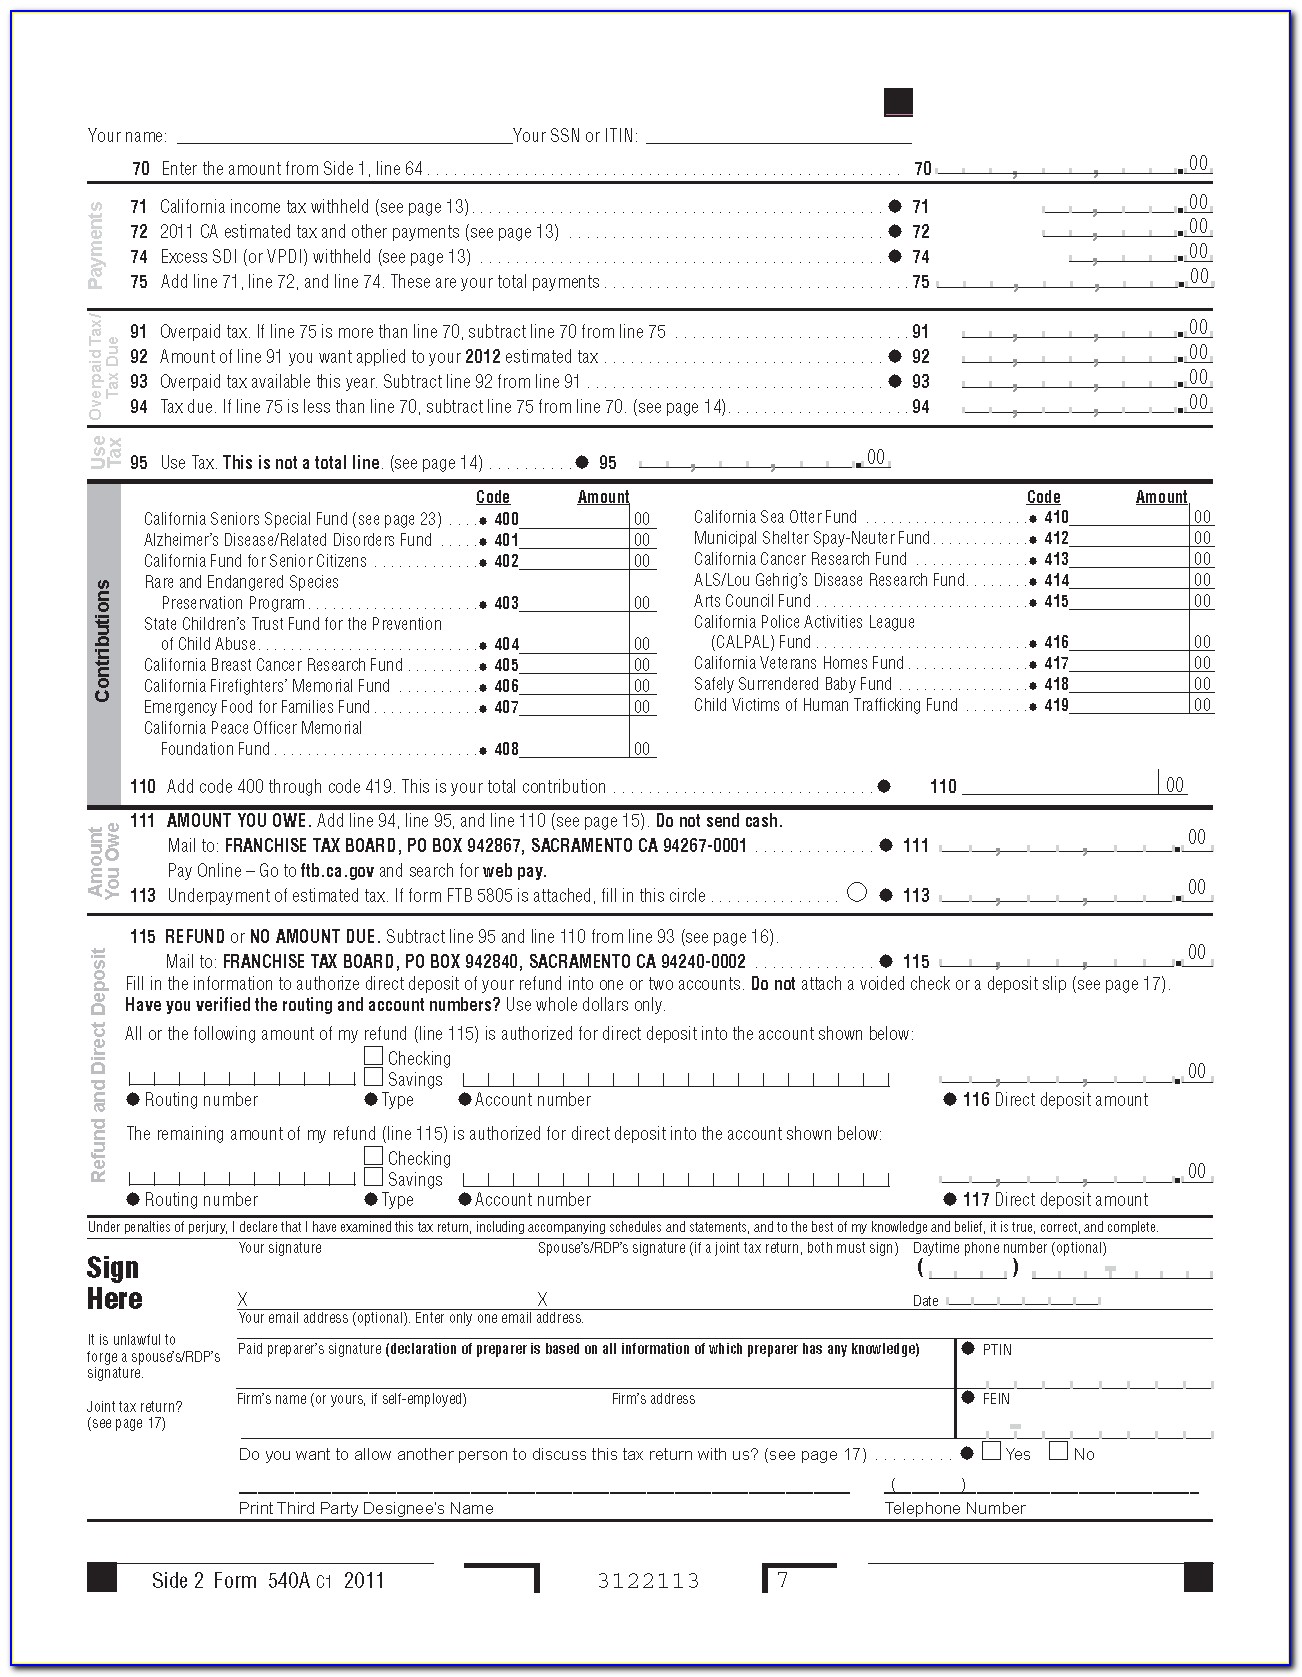 Where To Send Irs 1040ez Forms